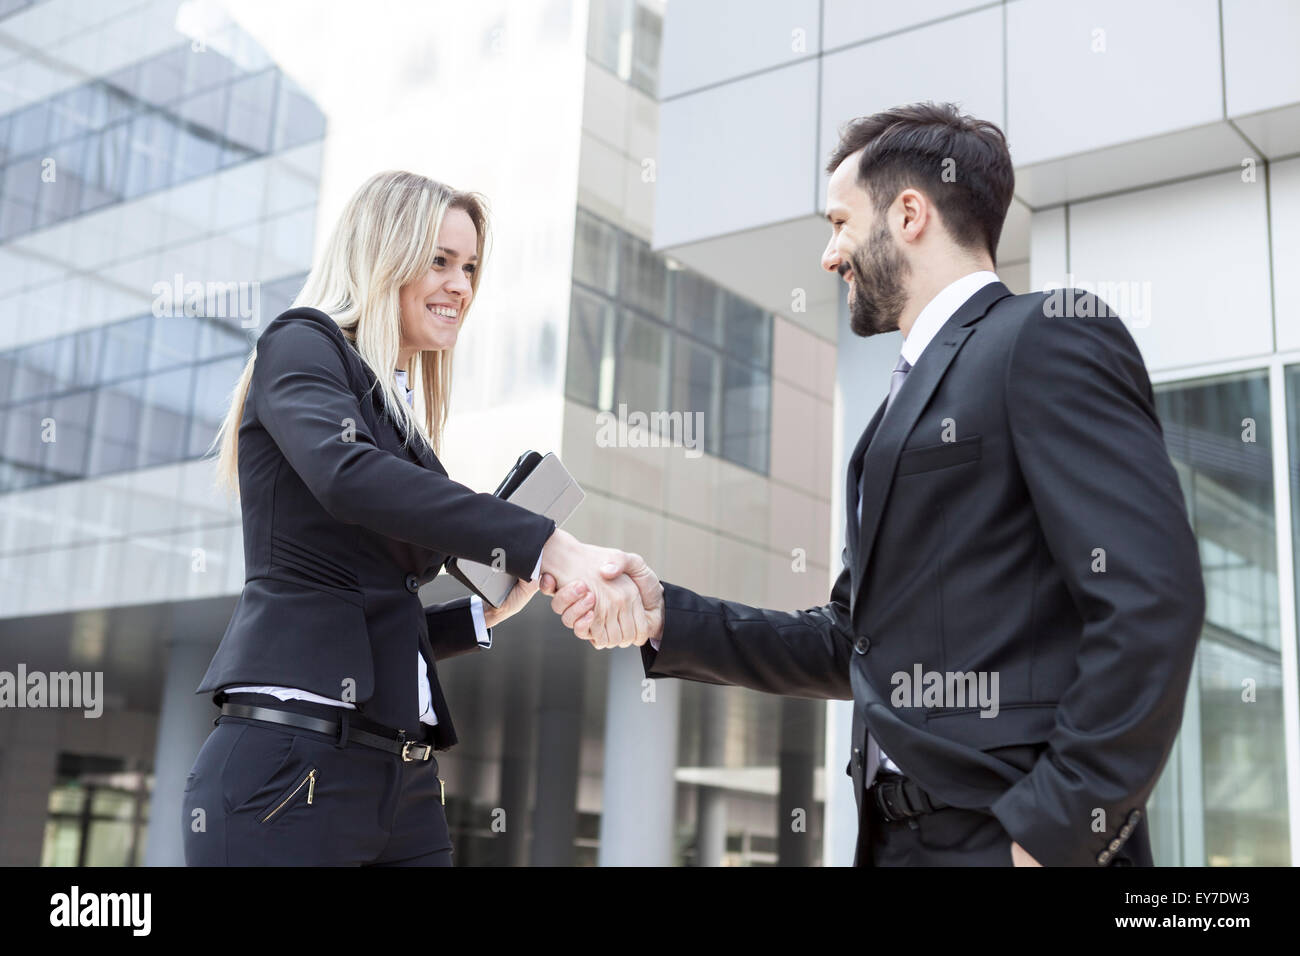 Business partners shaking hands Stock Photo